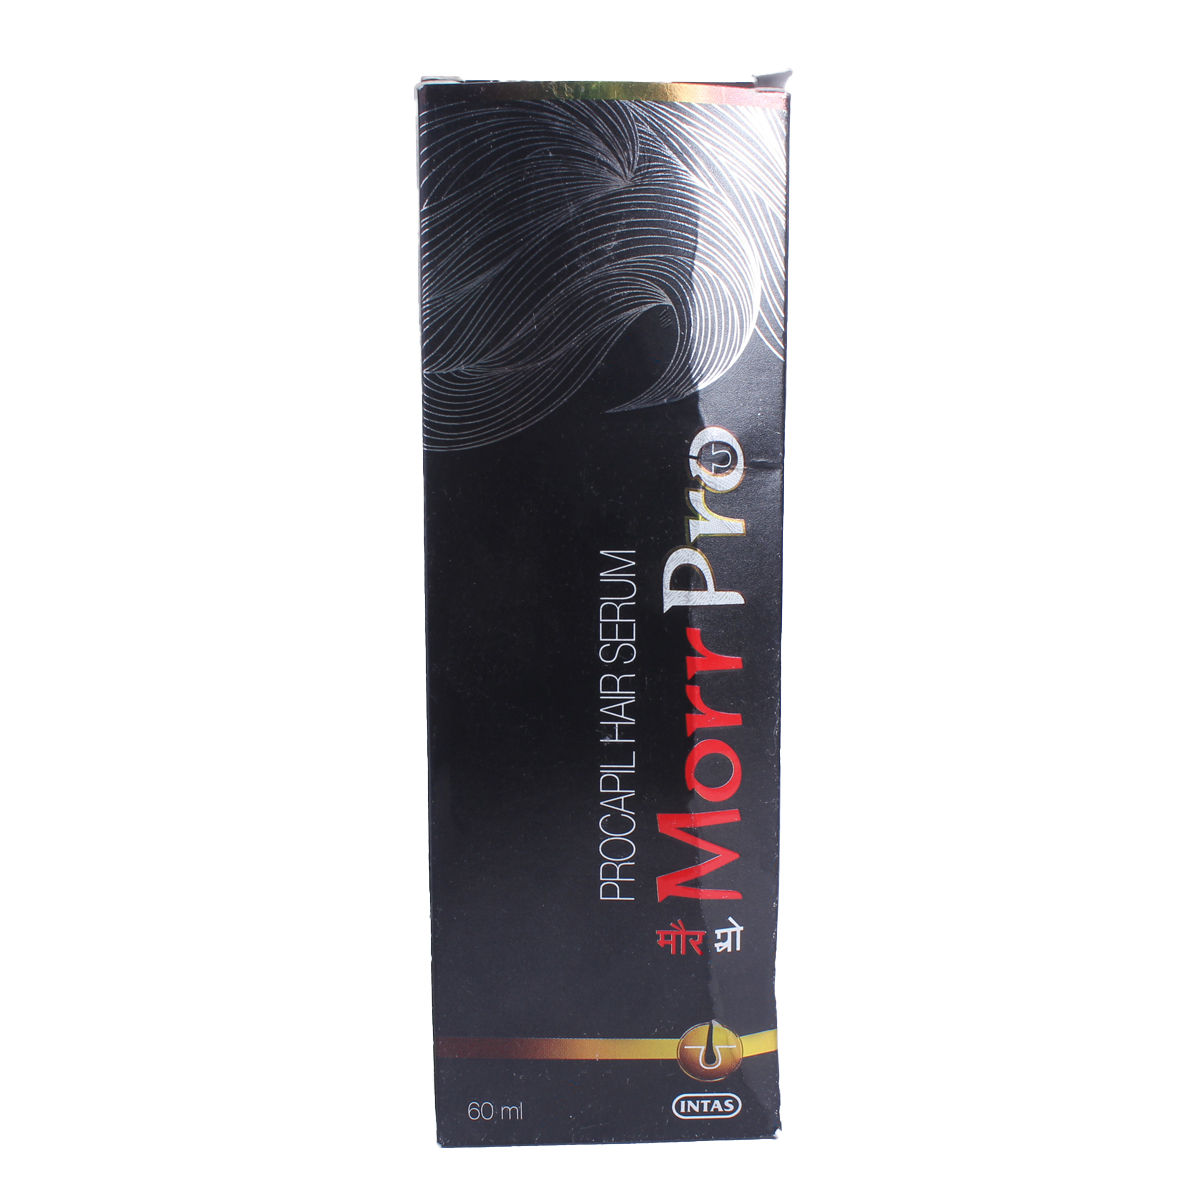 Morr Pro Hair Serum, 60 ml Price, Uses, Side Effects, Composition - Apollo  Pharmacy